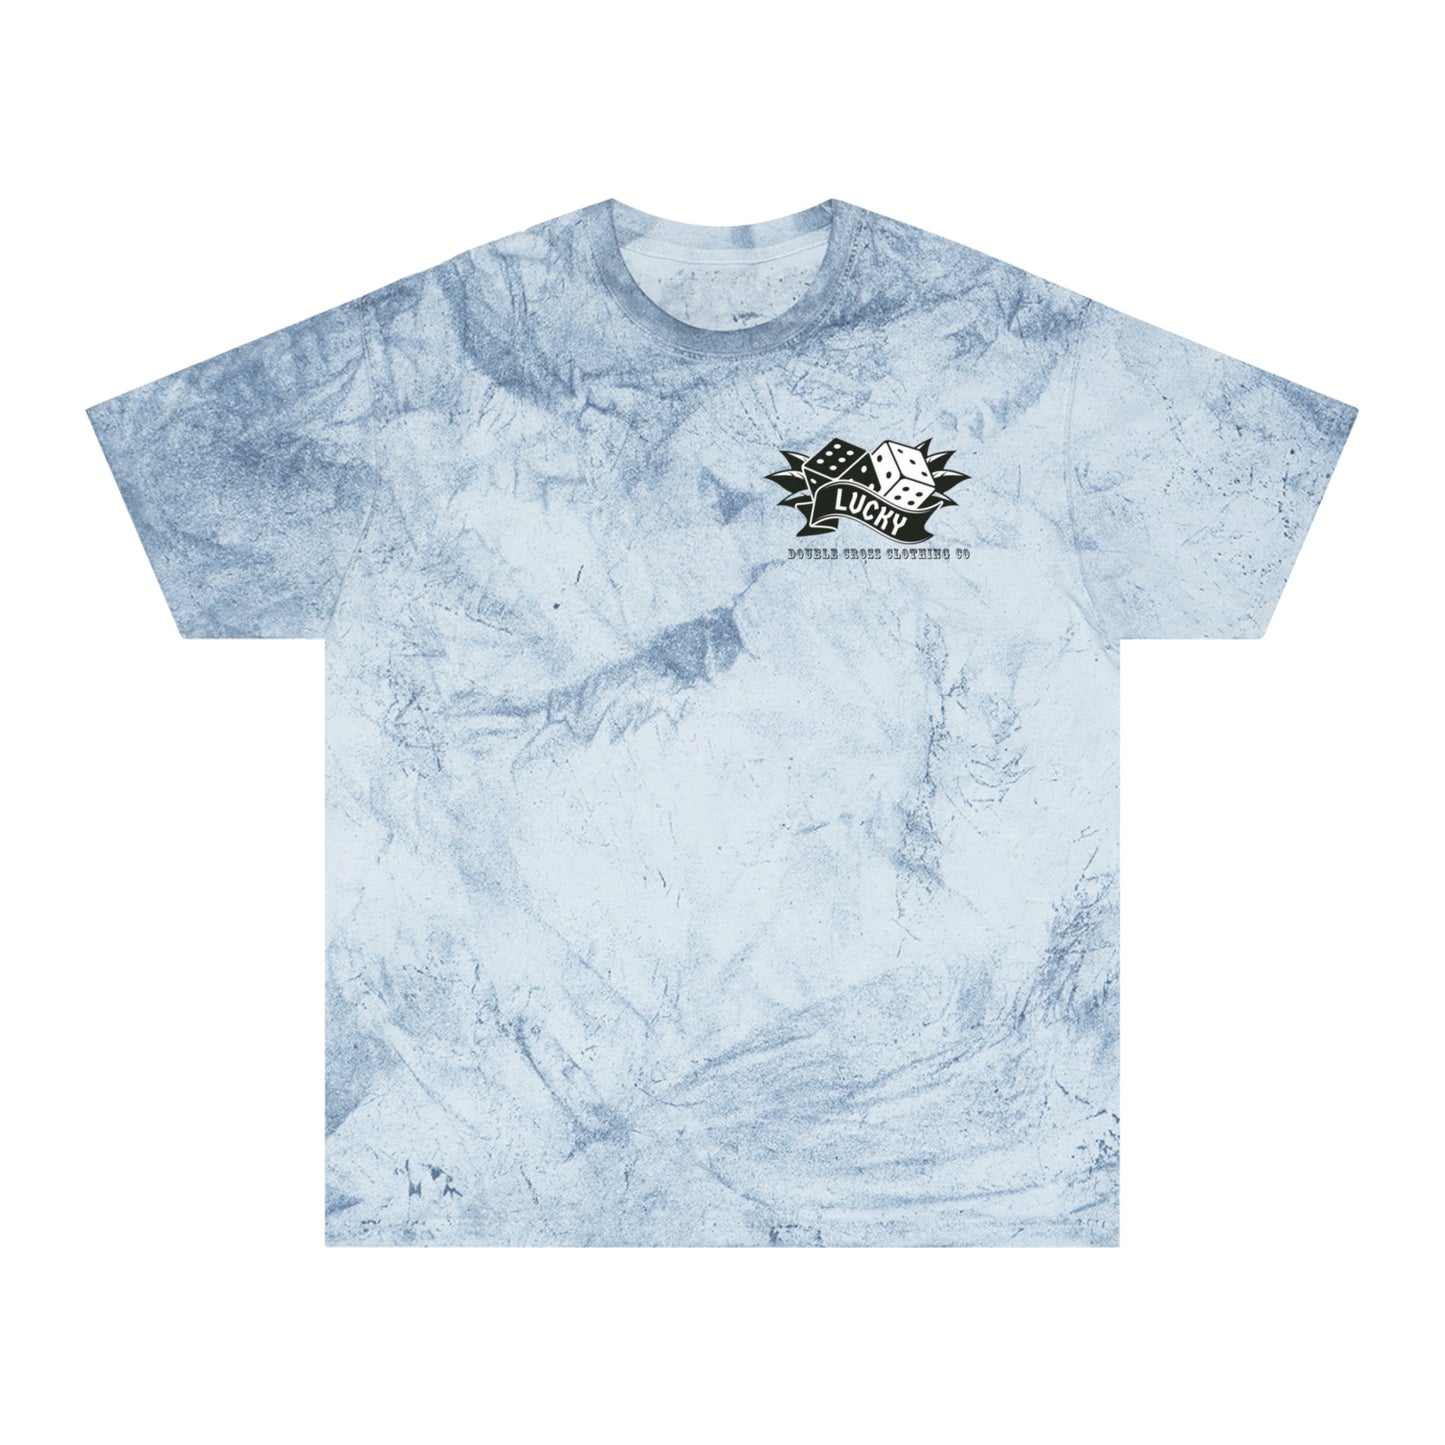 Jack of All Trades Tie-Dye T-Shirt